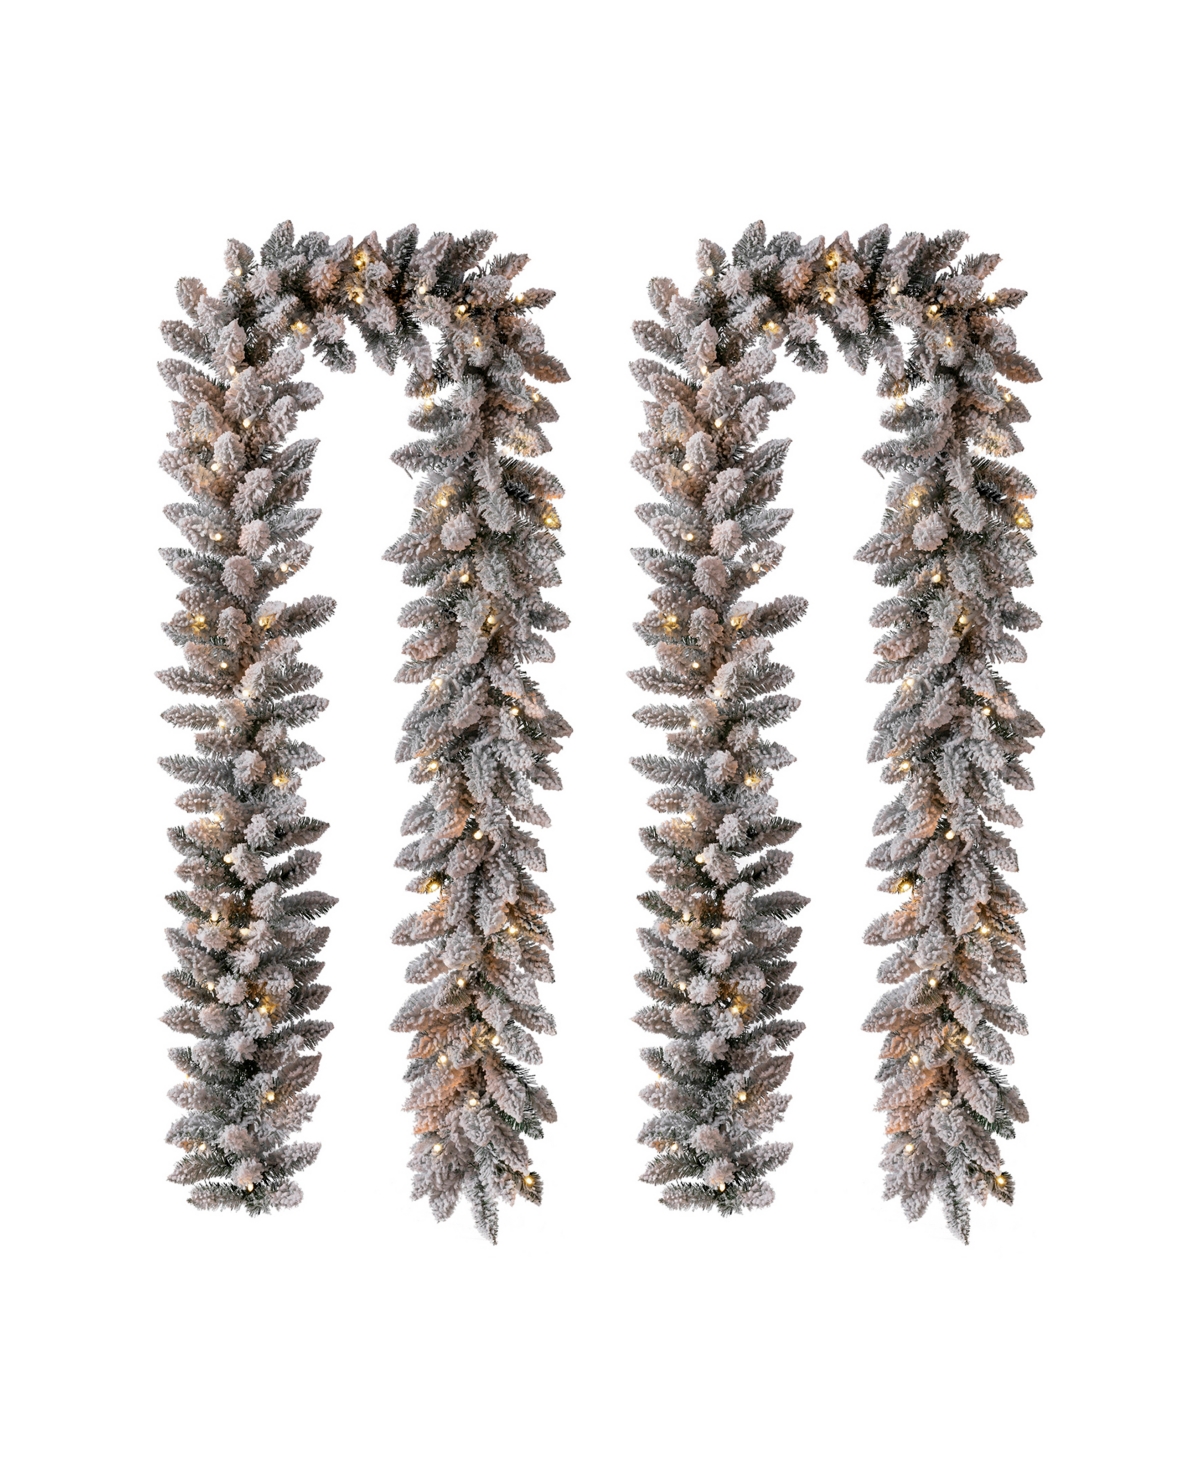 Glitzhome 2 Pack 9' Pre-lit Snow Flocked Christmas Garland With Warm Led Lights In Multi